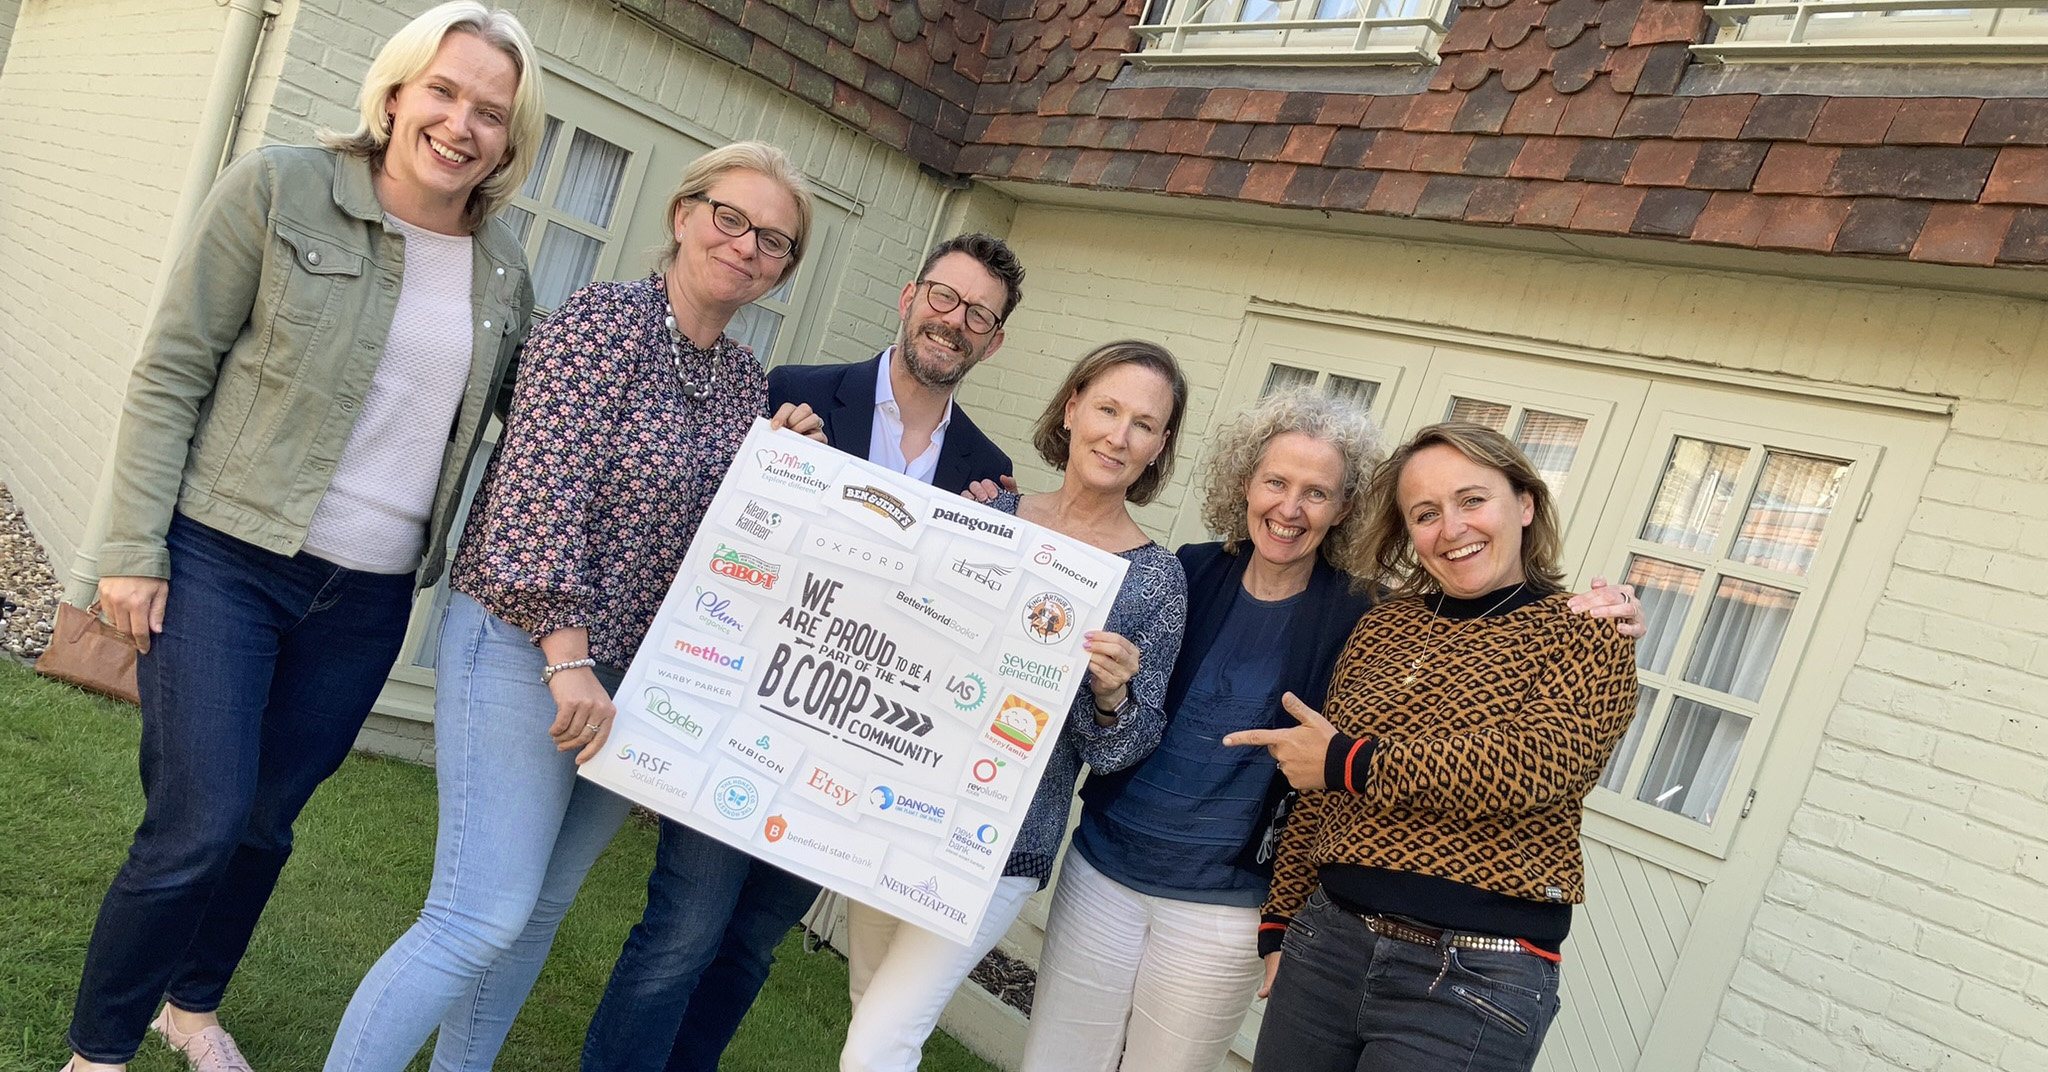 The Oxford SM team holding their B Corp certification poster smiling at the camera